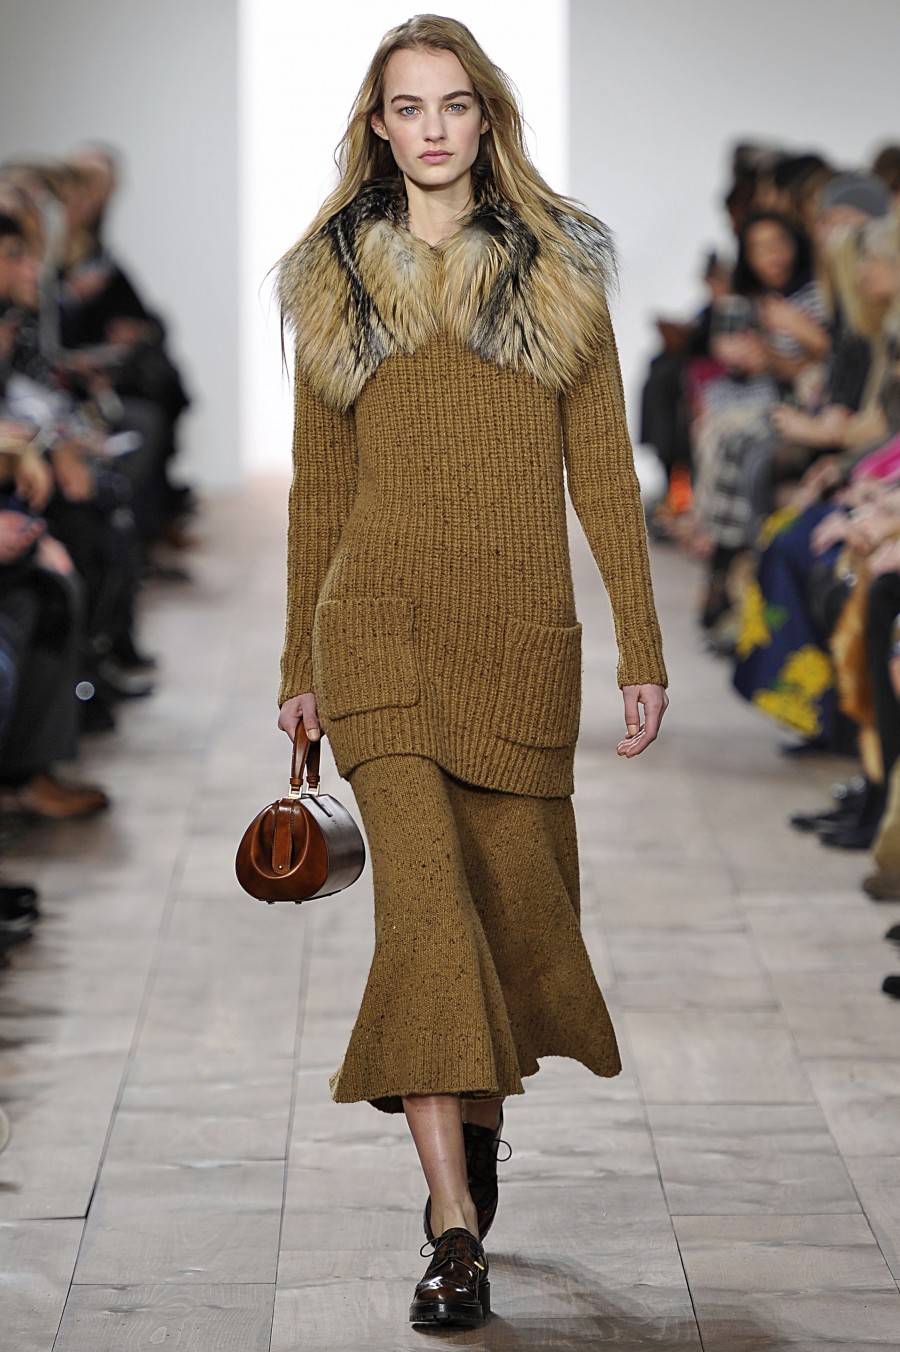 Michael Kors Fall 2015 - Daily Front Row